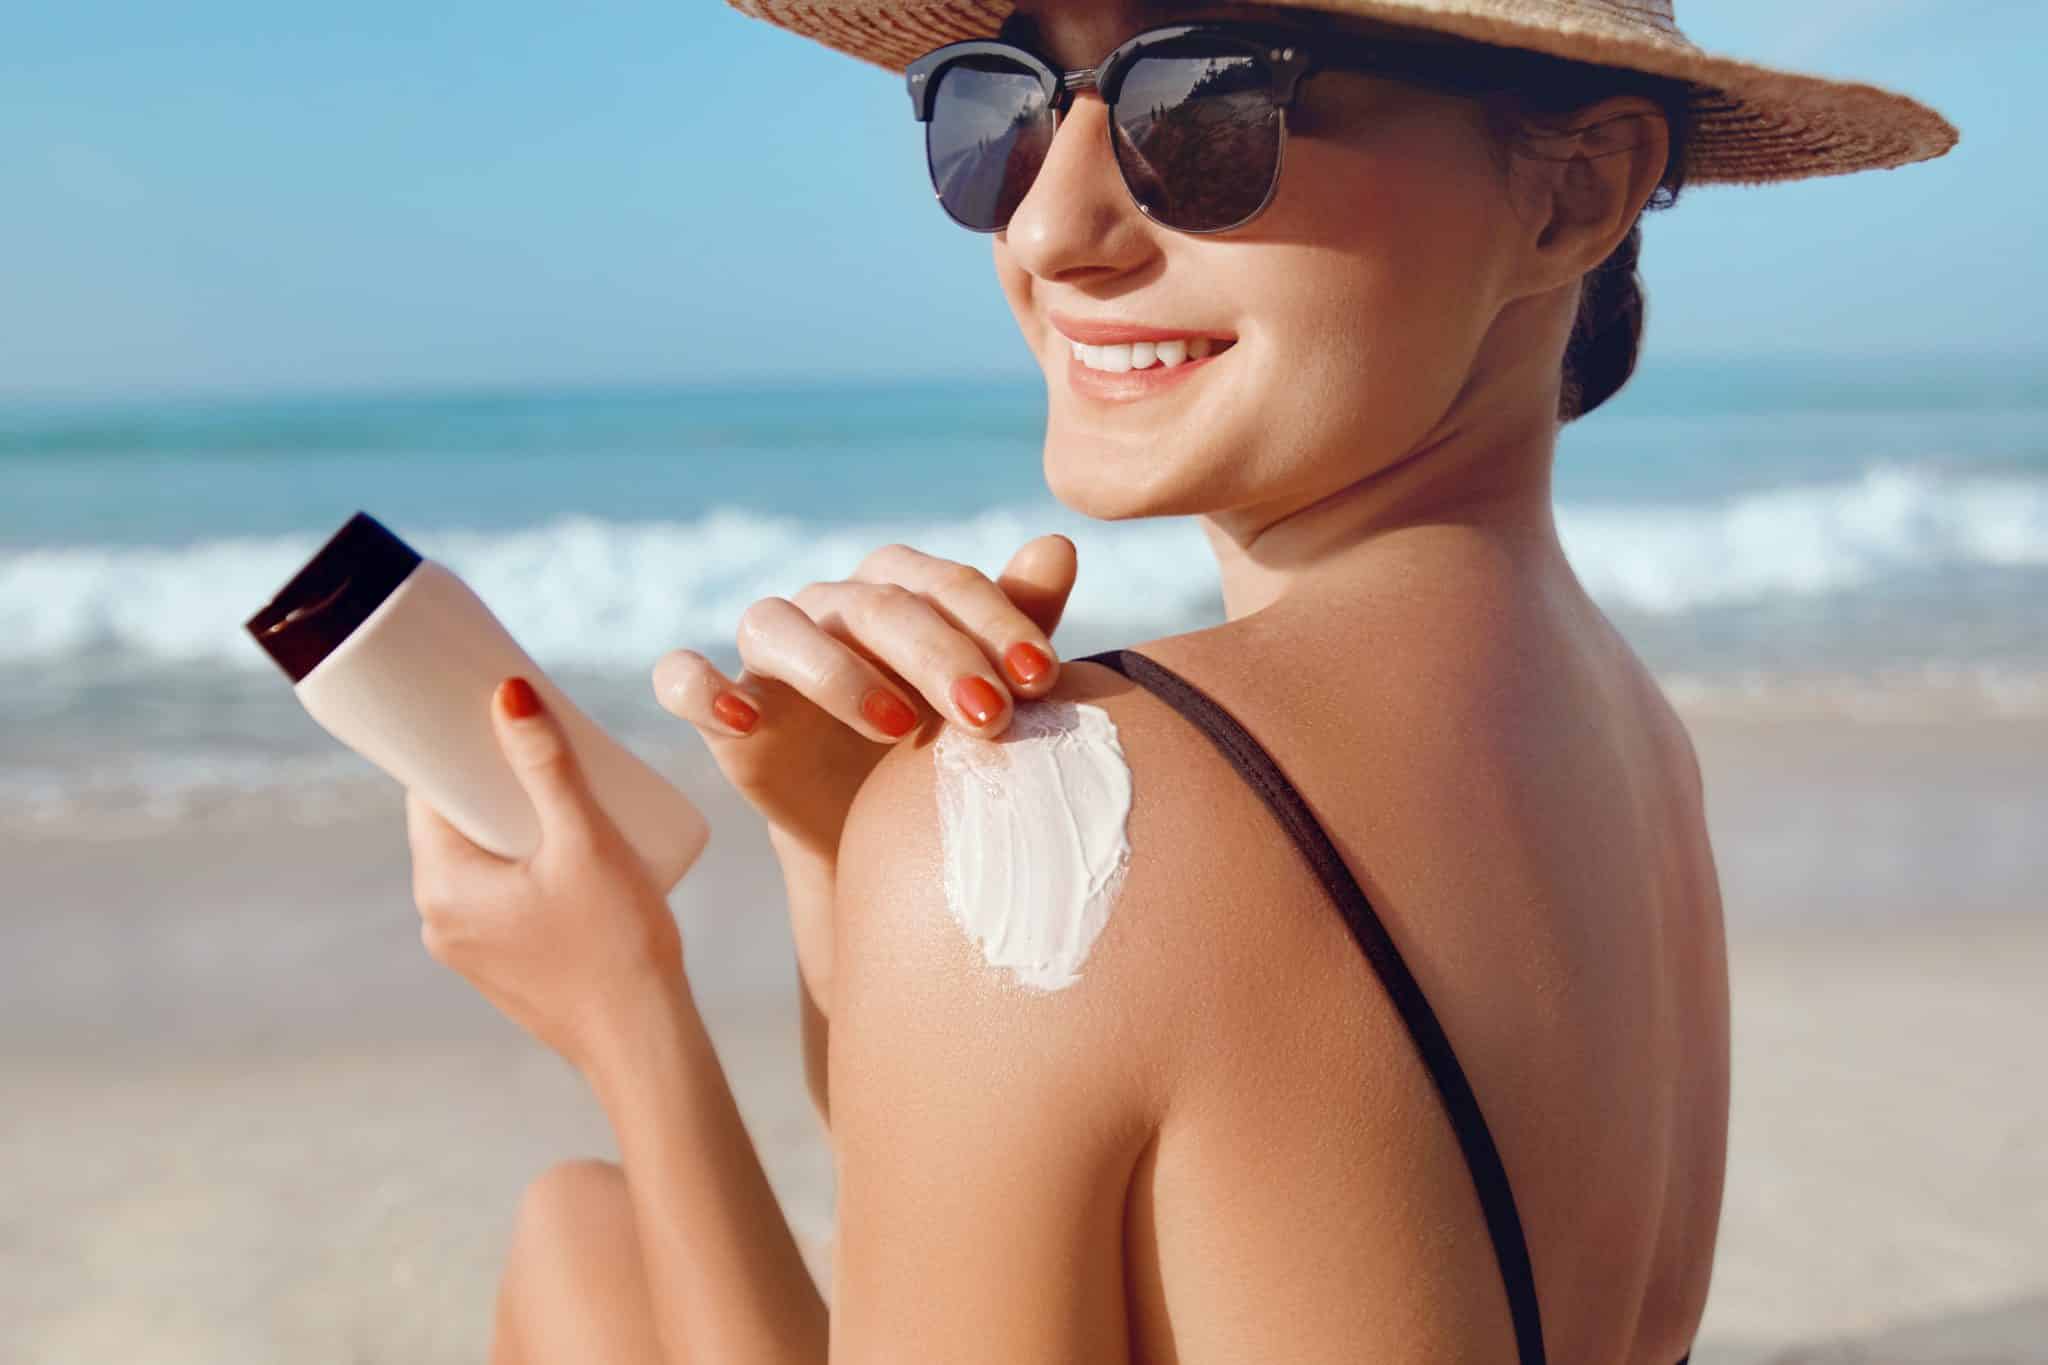 Woman Applying Sunscreen On Shoulder For Sun Protection